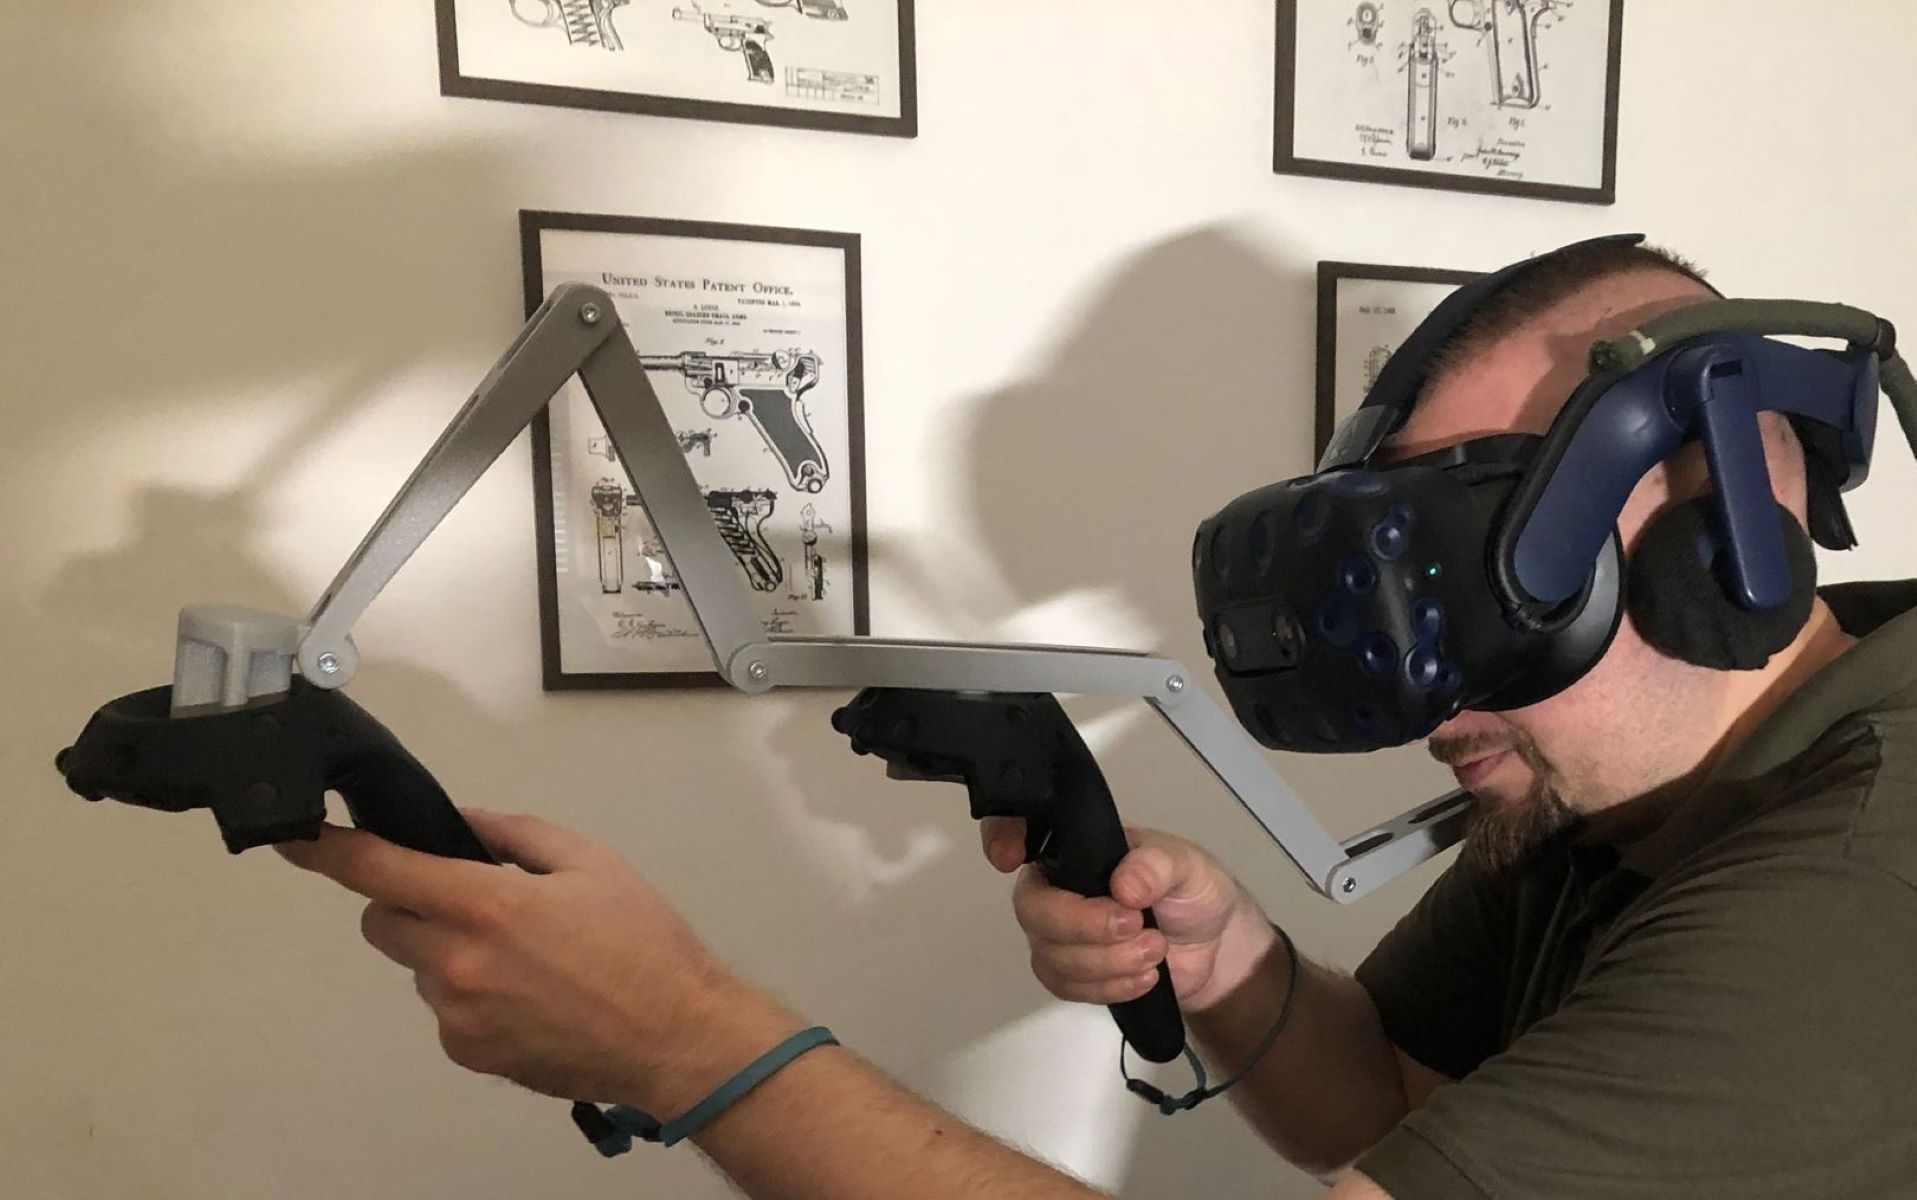 How To Turn HTC Vive Controllers Into Guns